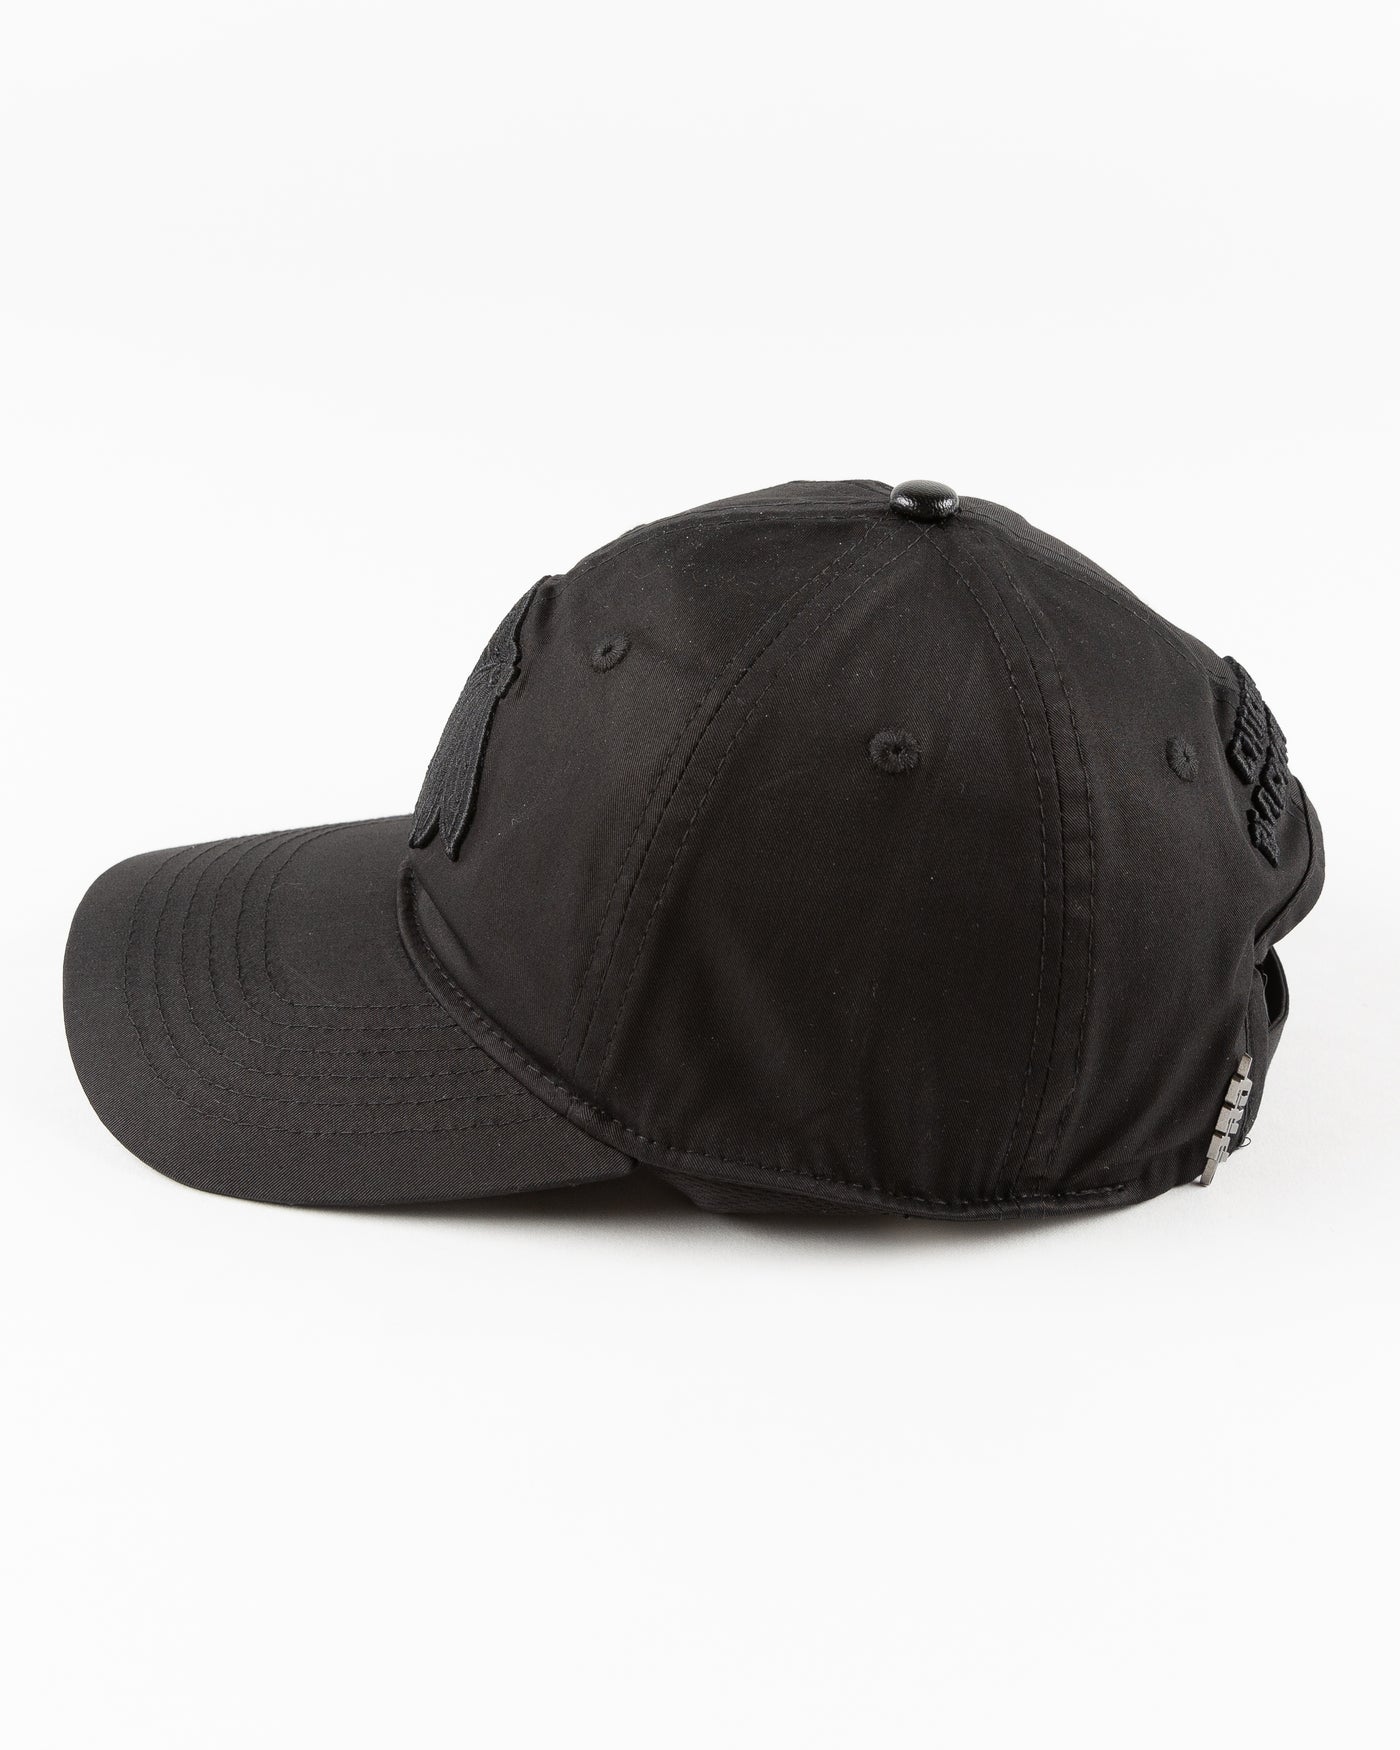 all black adjustable cap with tonal Chicago Blackhawks primary logo embroidered on front - left side lay flat 